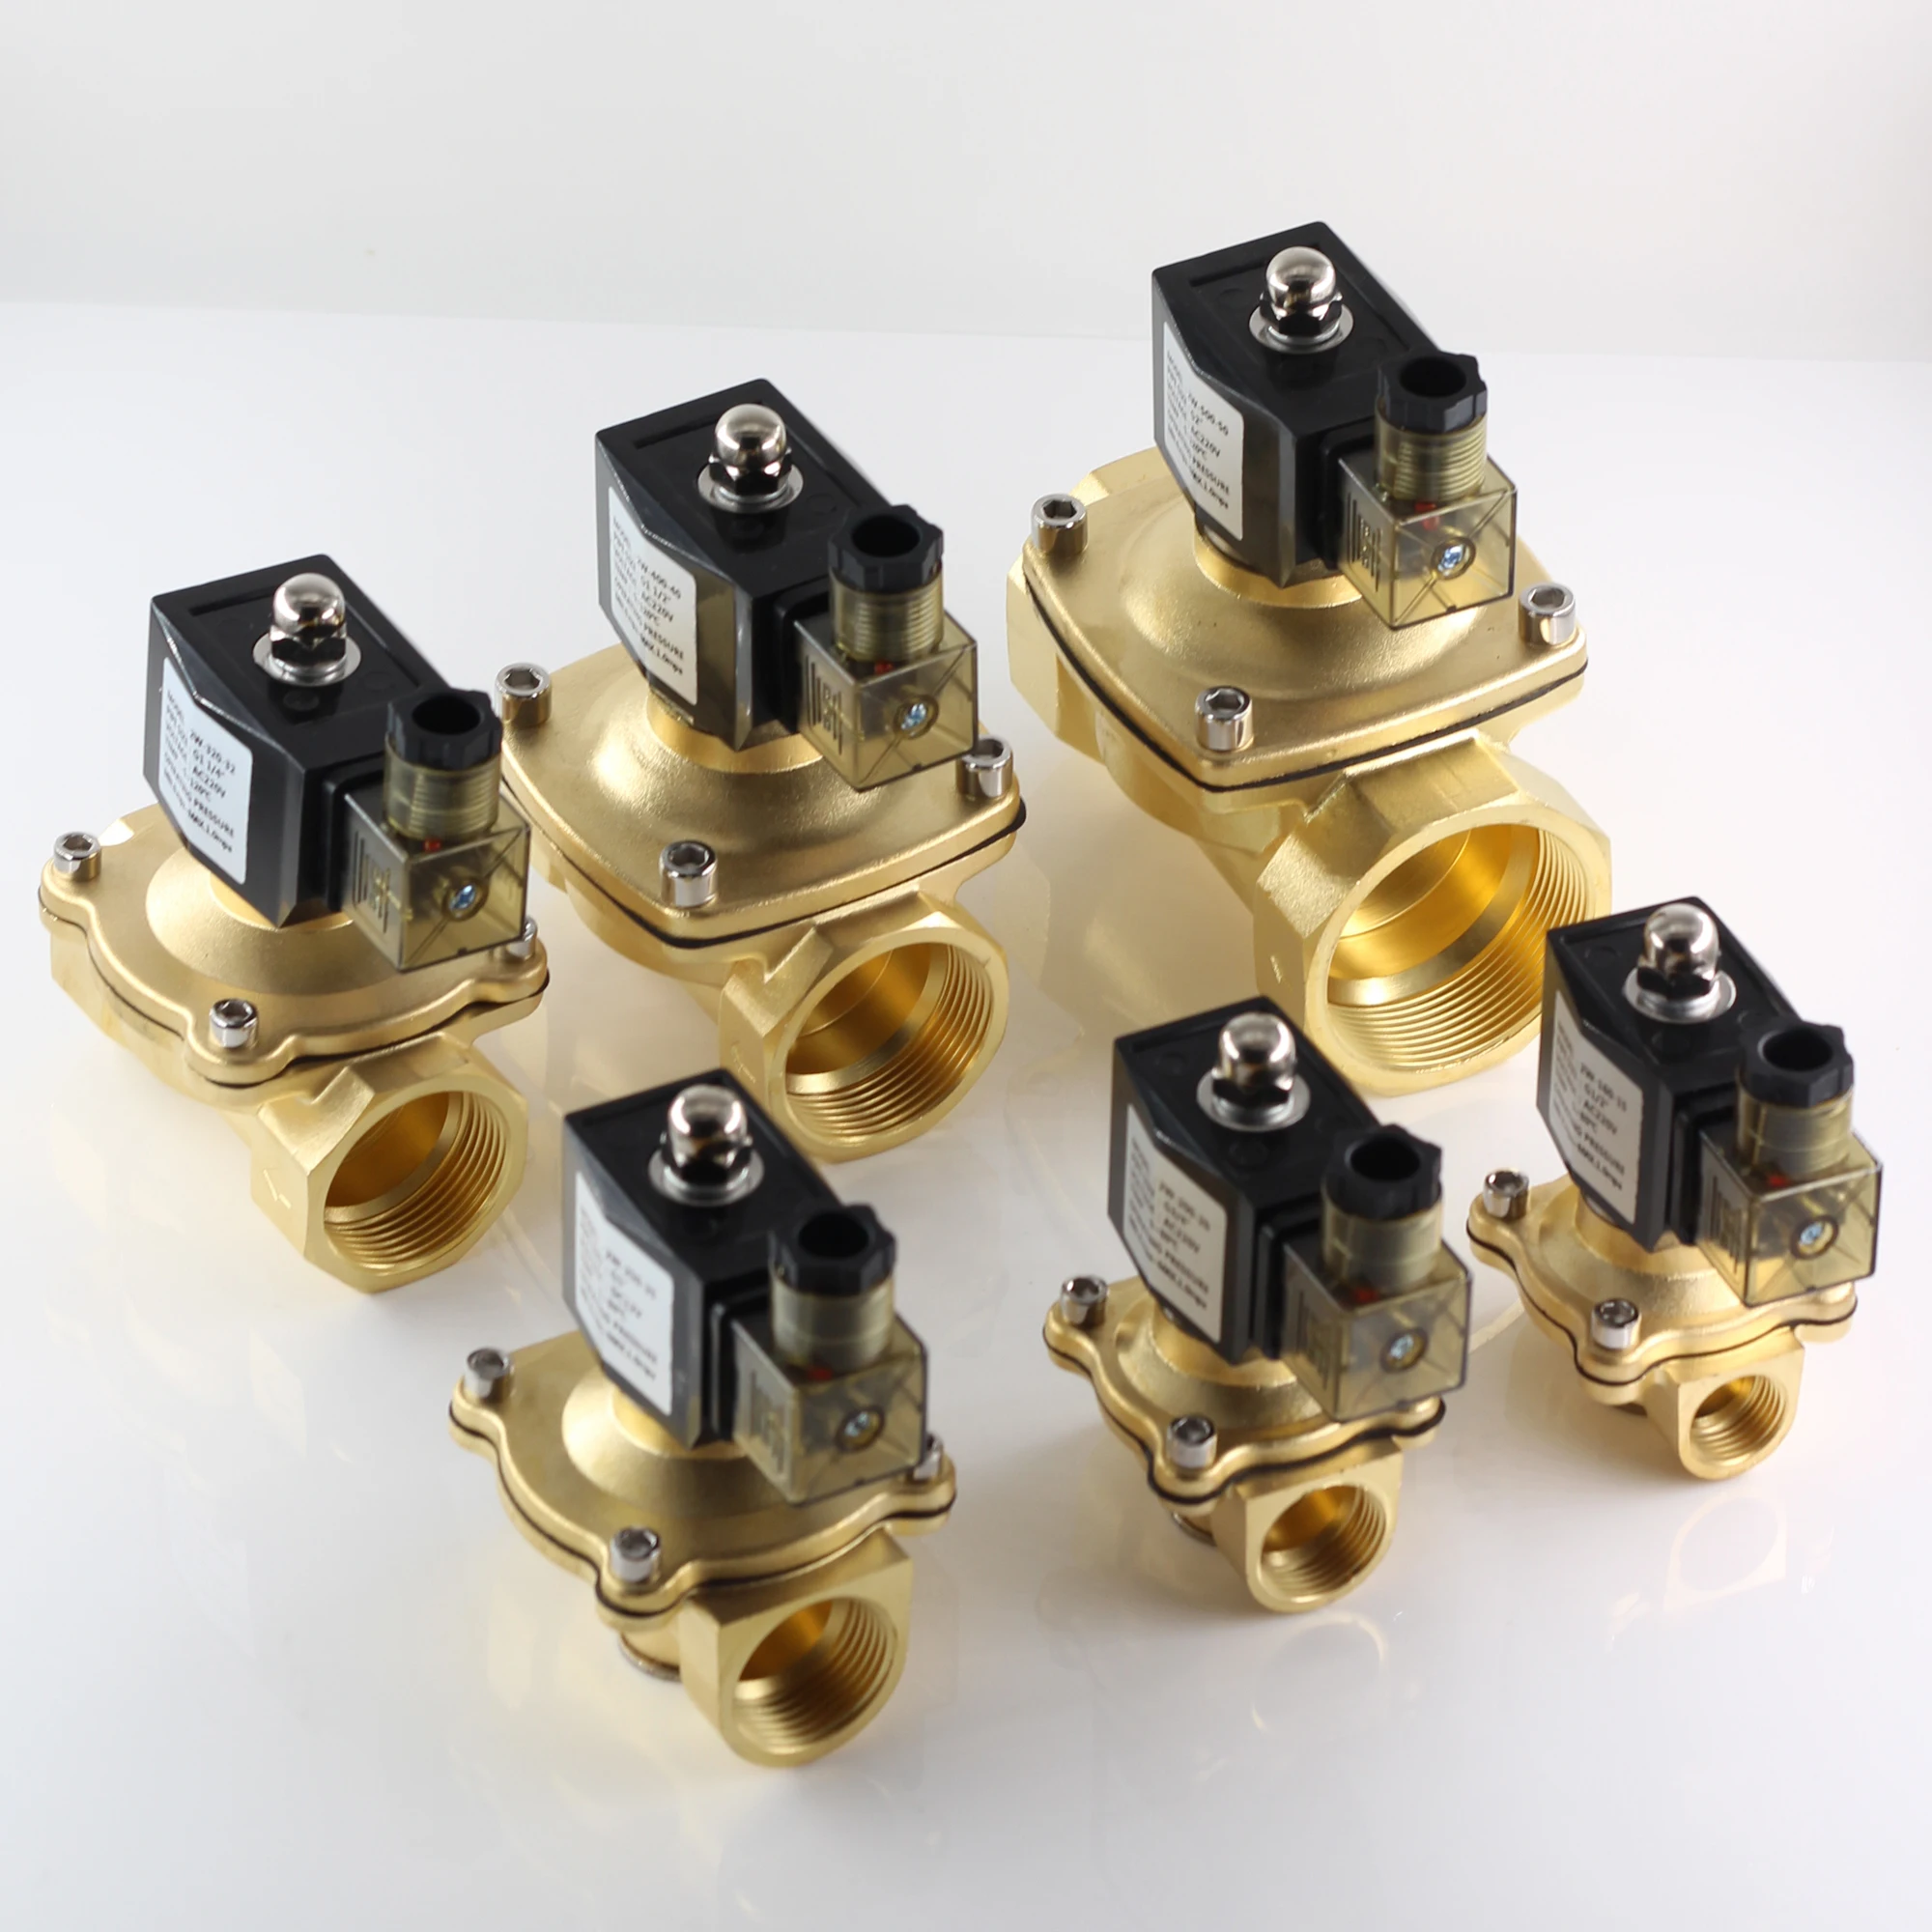 

AC 220V Water solenoid valve normally closed,DC 24V Electric air Valves,12V G1/2" 3/4" 1" to 2" valve for Hot water Oil Air